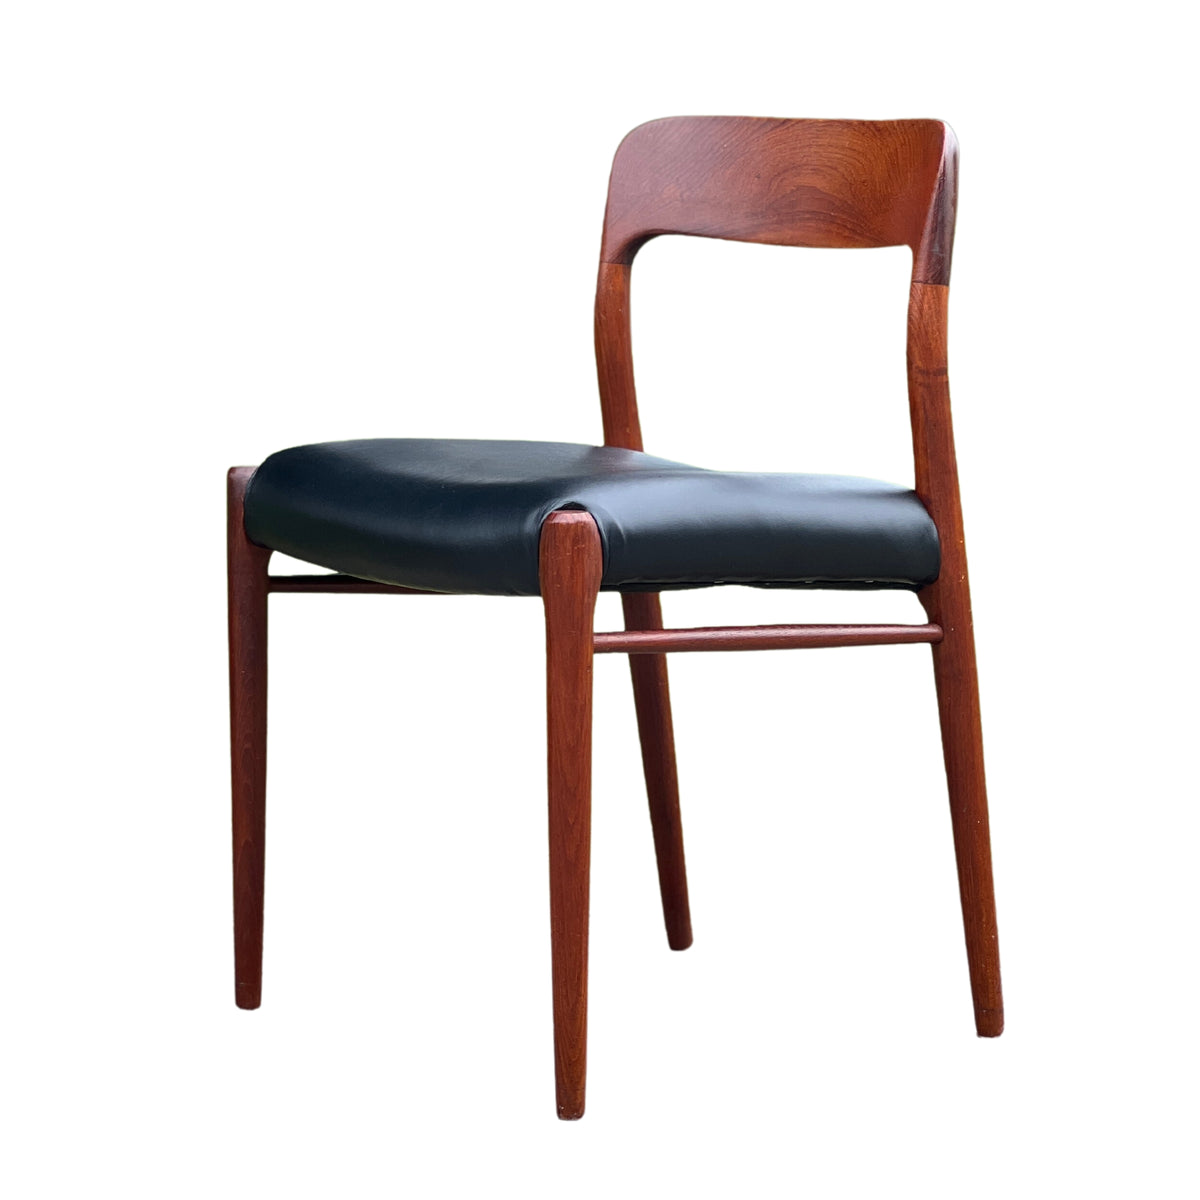 Model 75 Chairs by Niels Moller